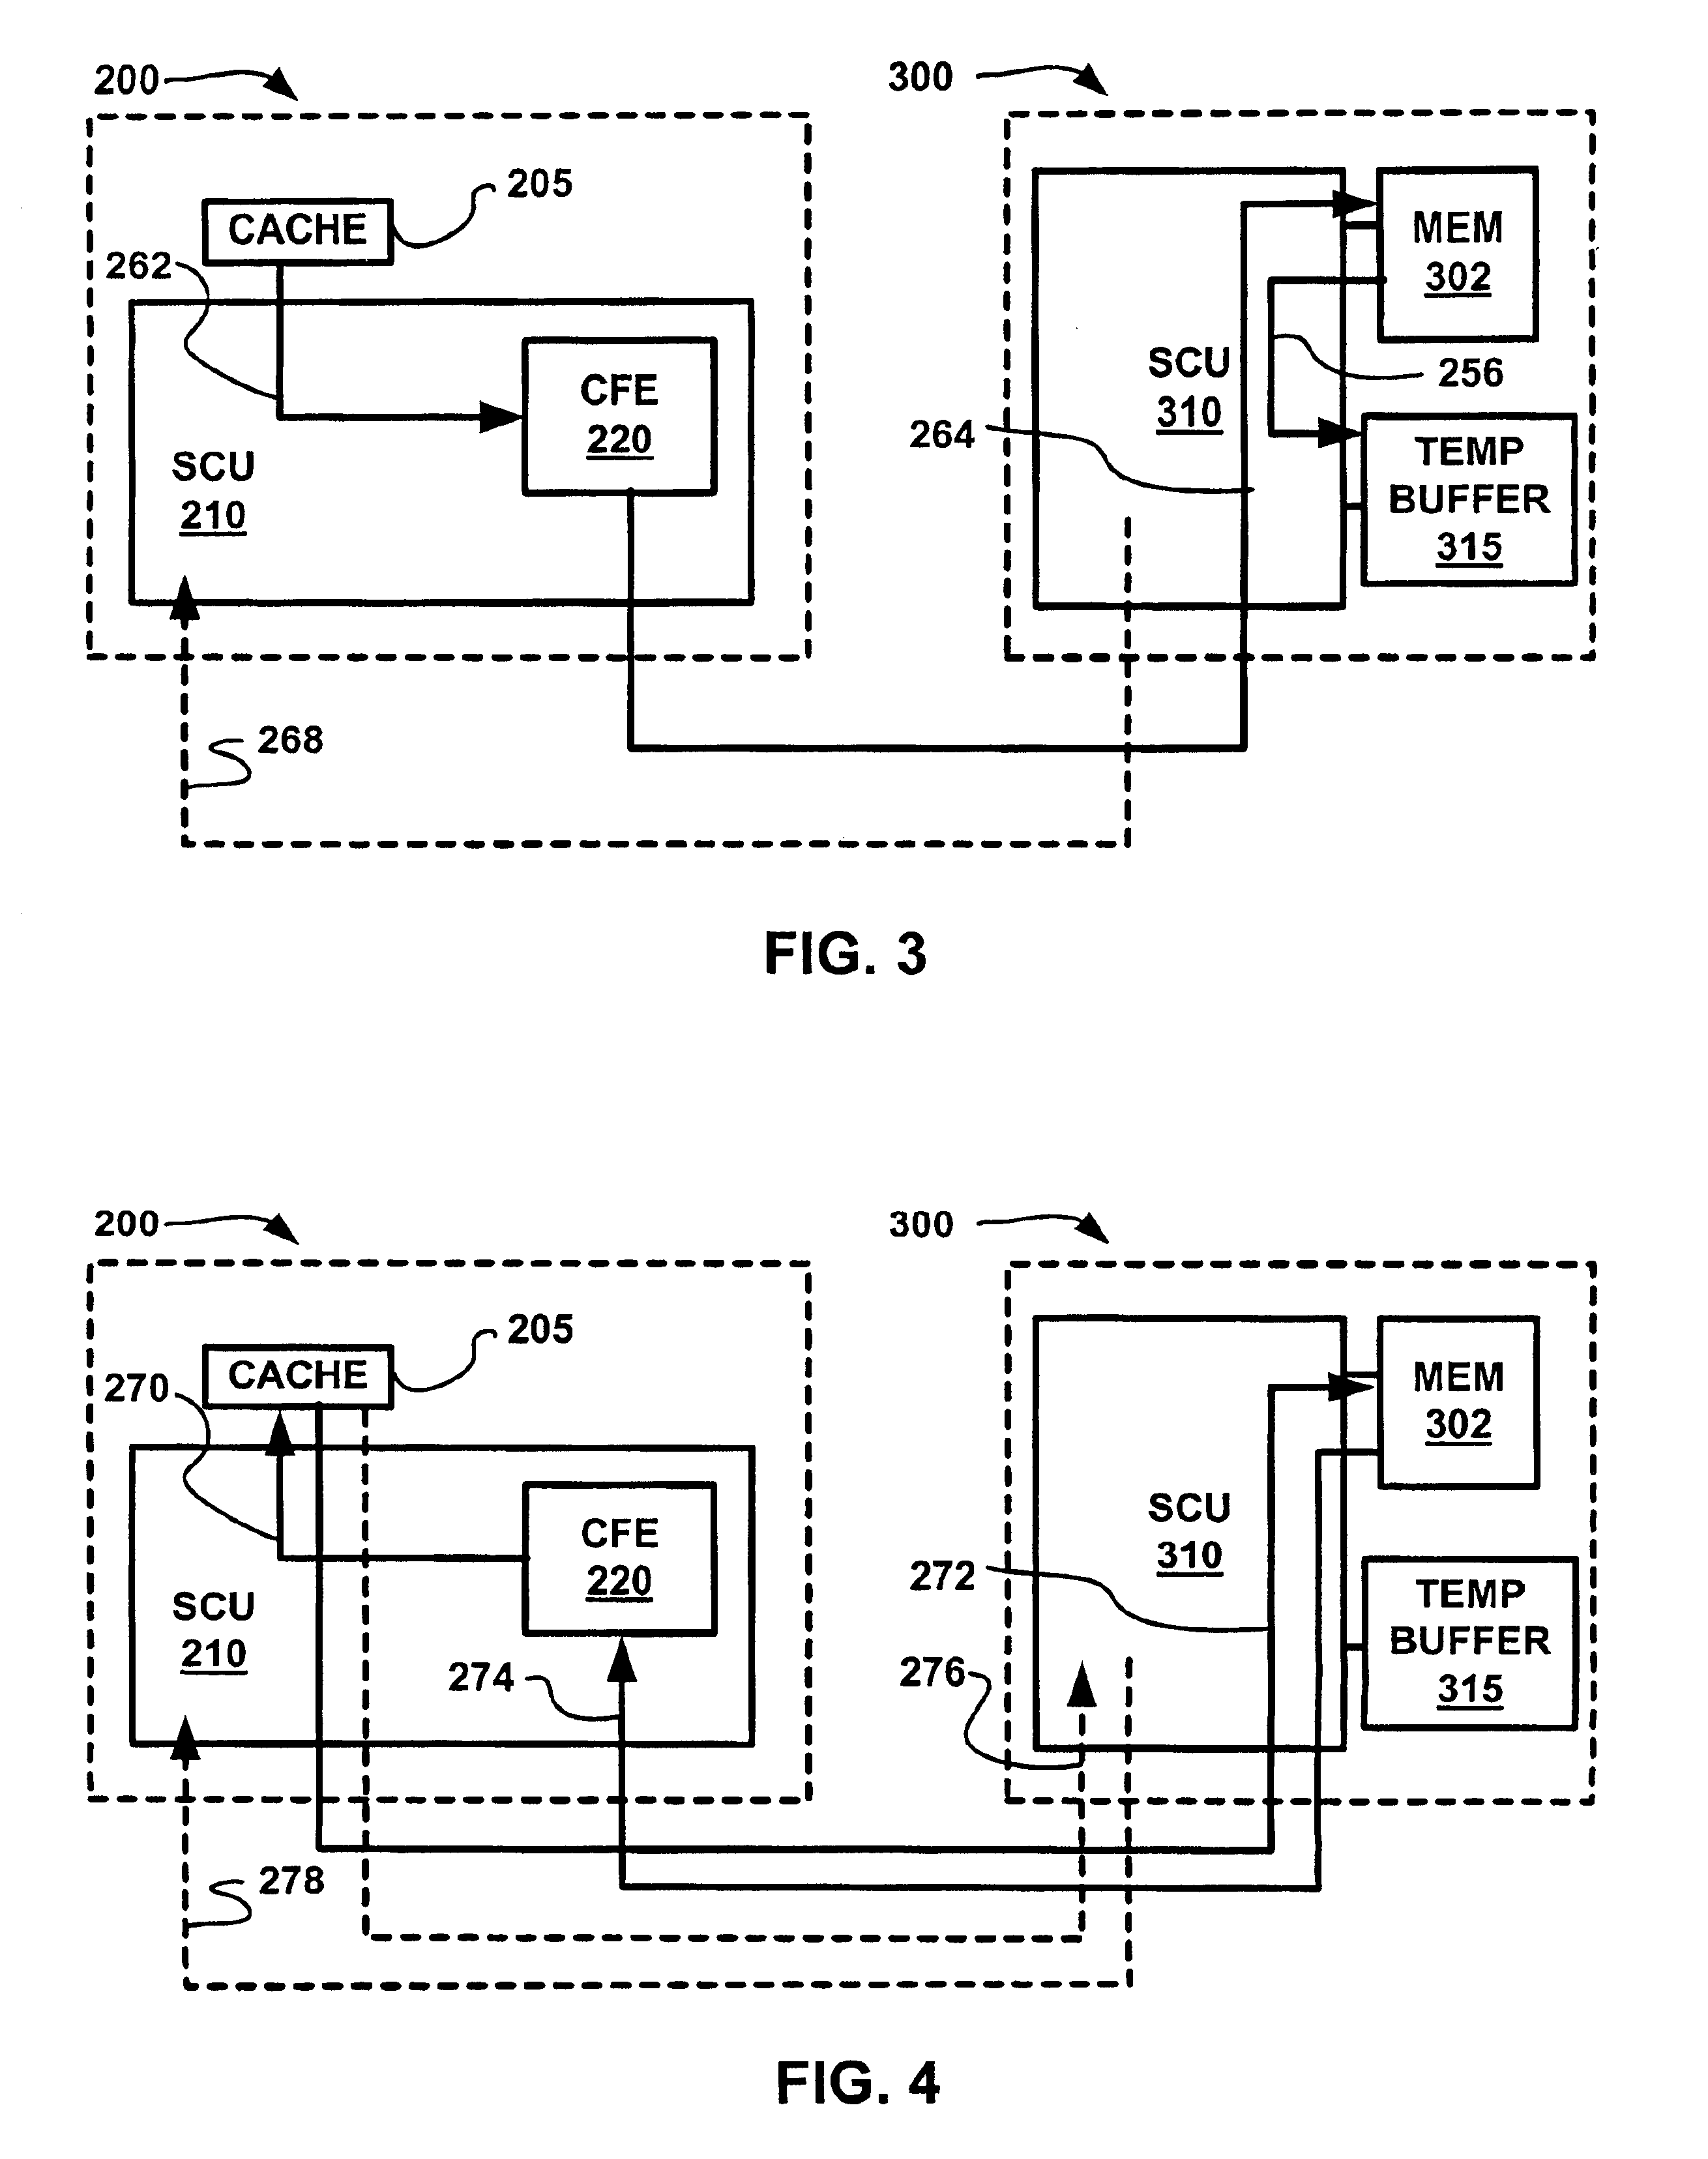 Multi-processor computer system with transactional memory